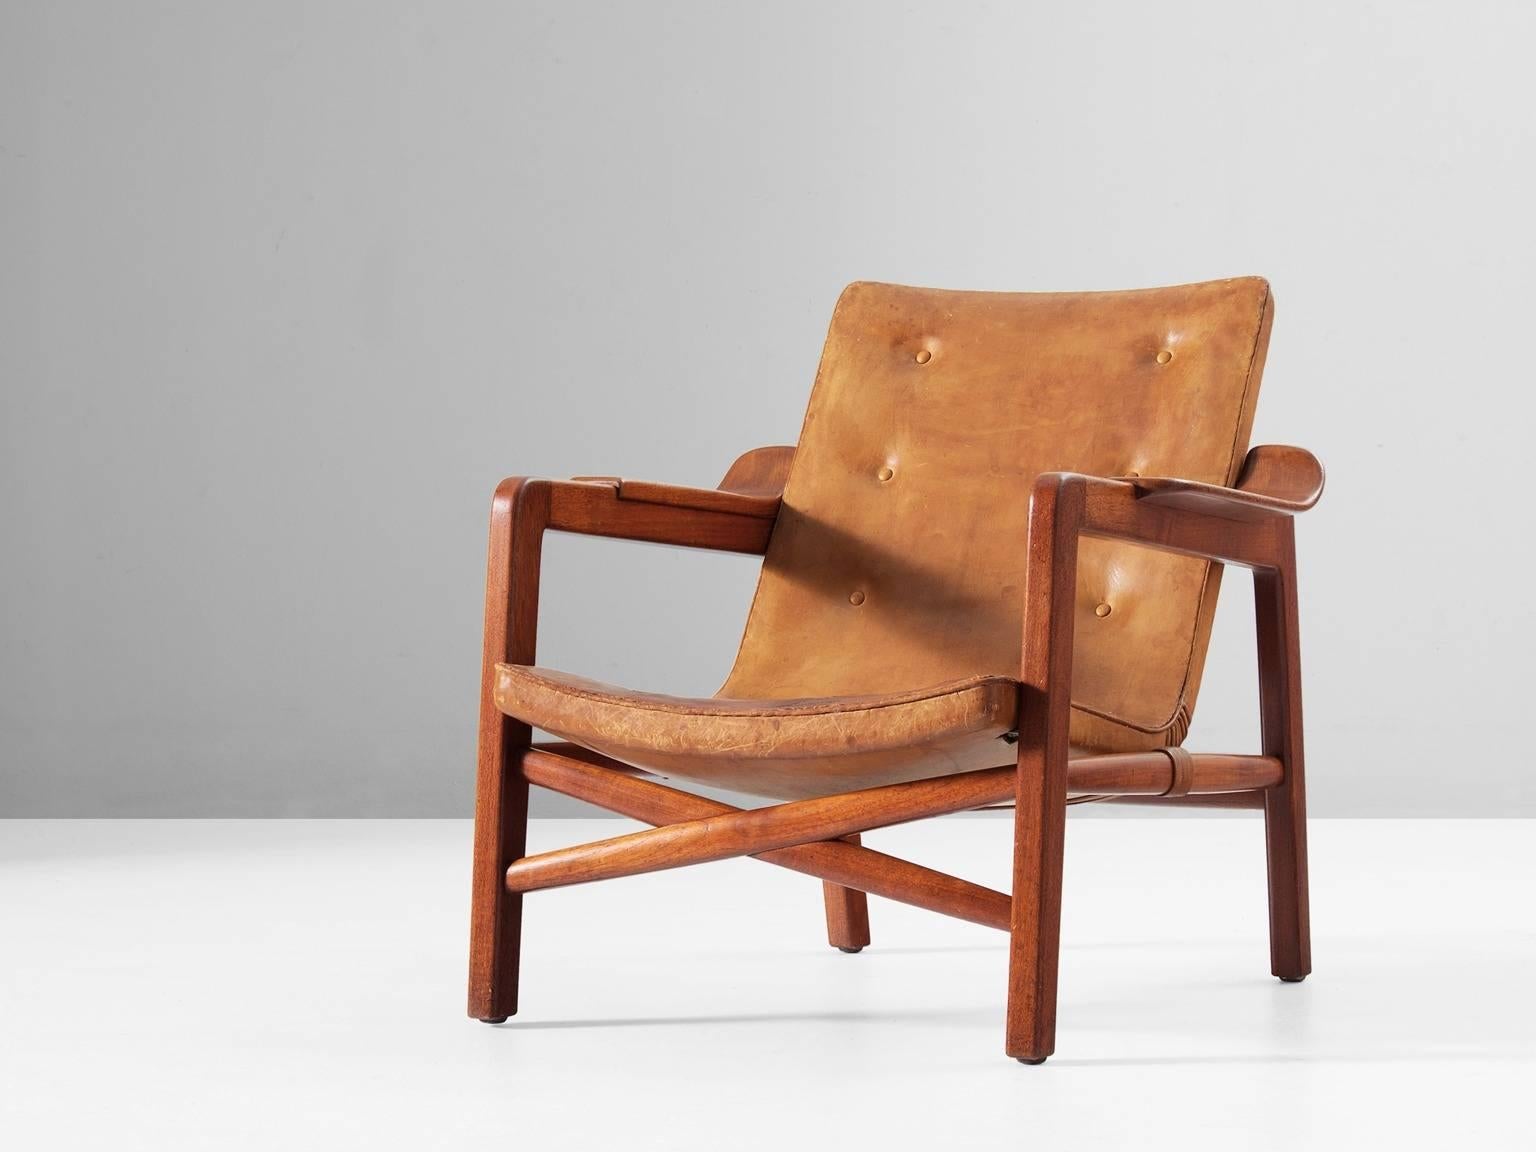 'Fireplace' chair, in teak and leather, by Tove & Edvard Kindt-Larsen for Gustav Bertelsen, Denmark, 1939..

This lounge chair was specially designed to sit in front of a fireplace. When it was first exhibited, this model was mentioned as a